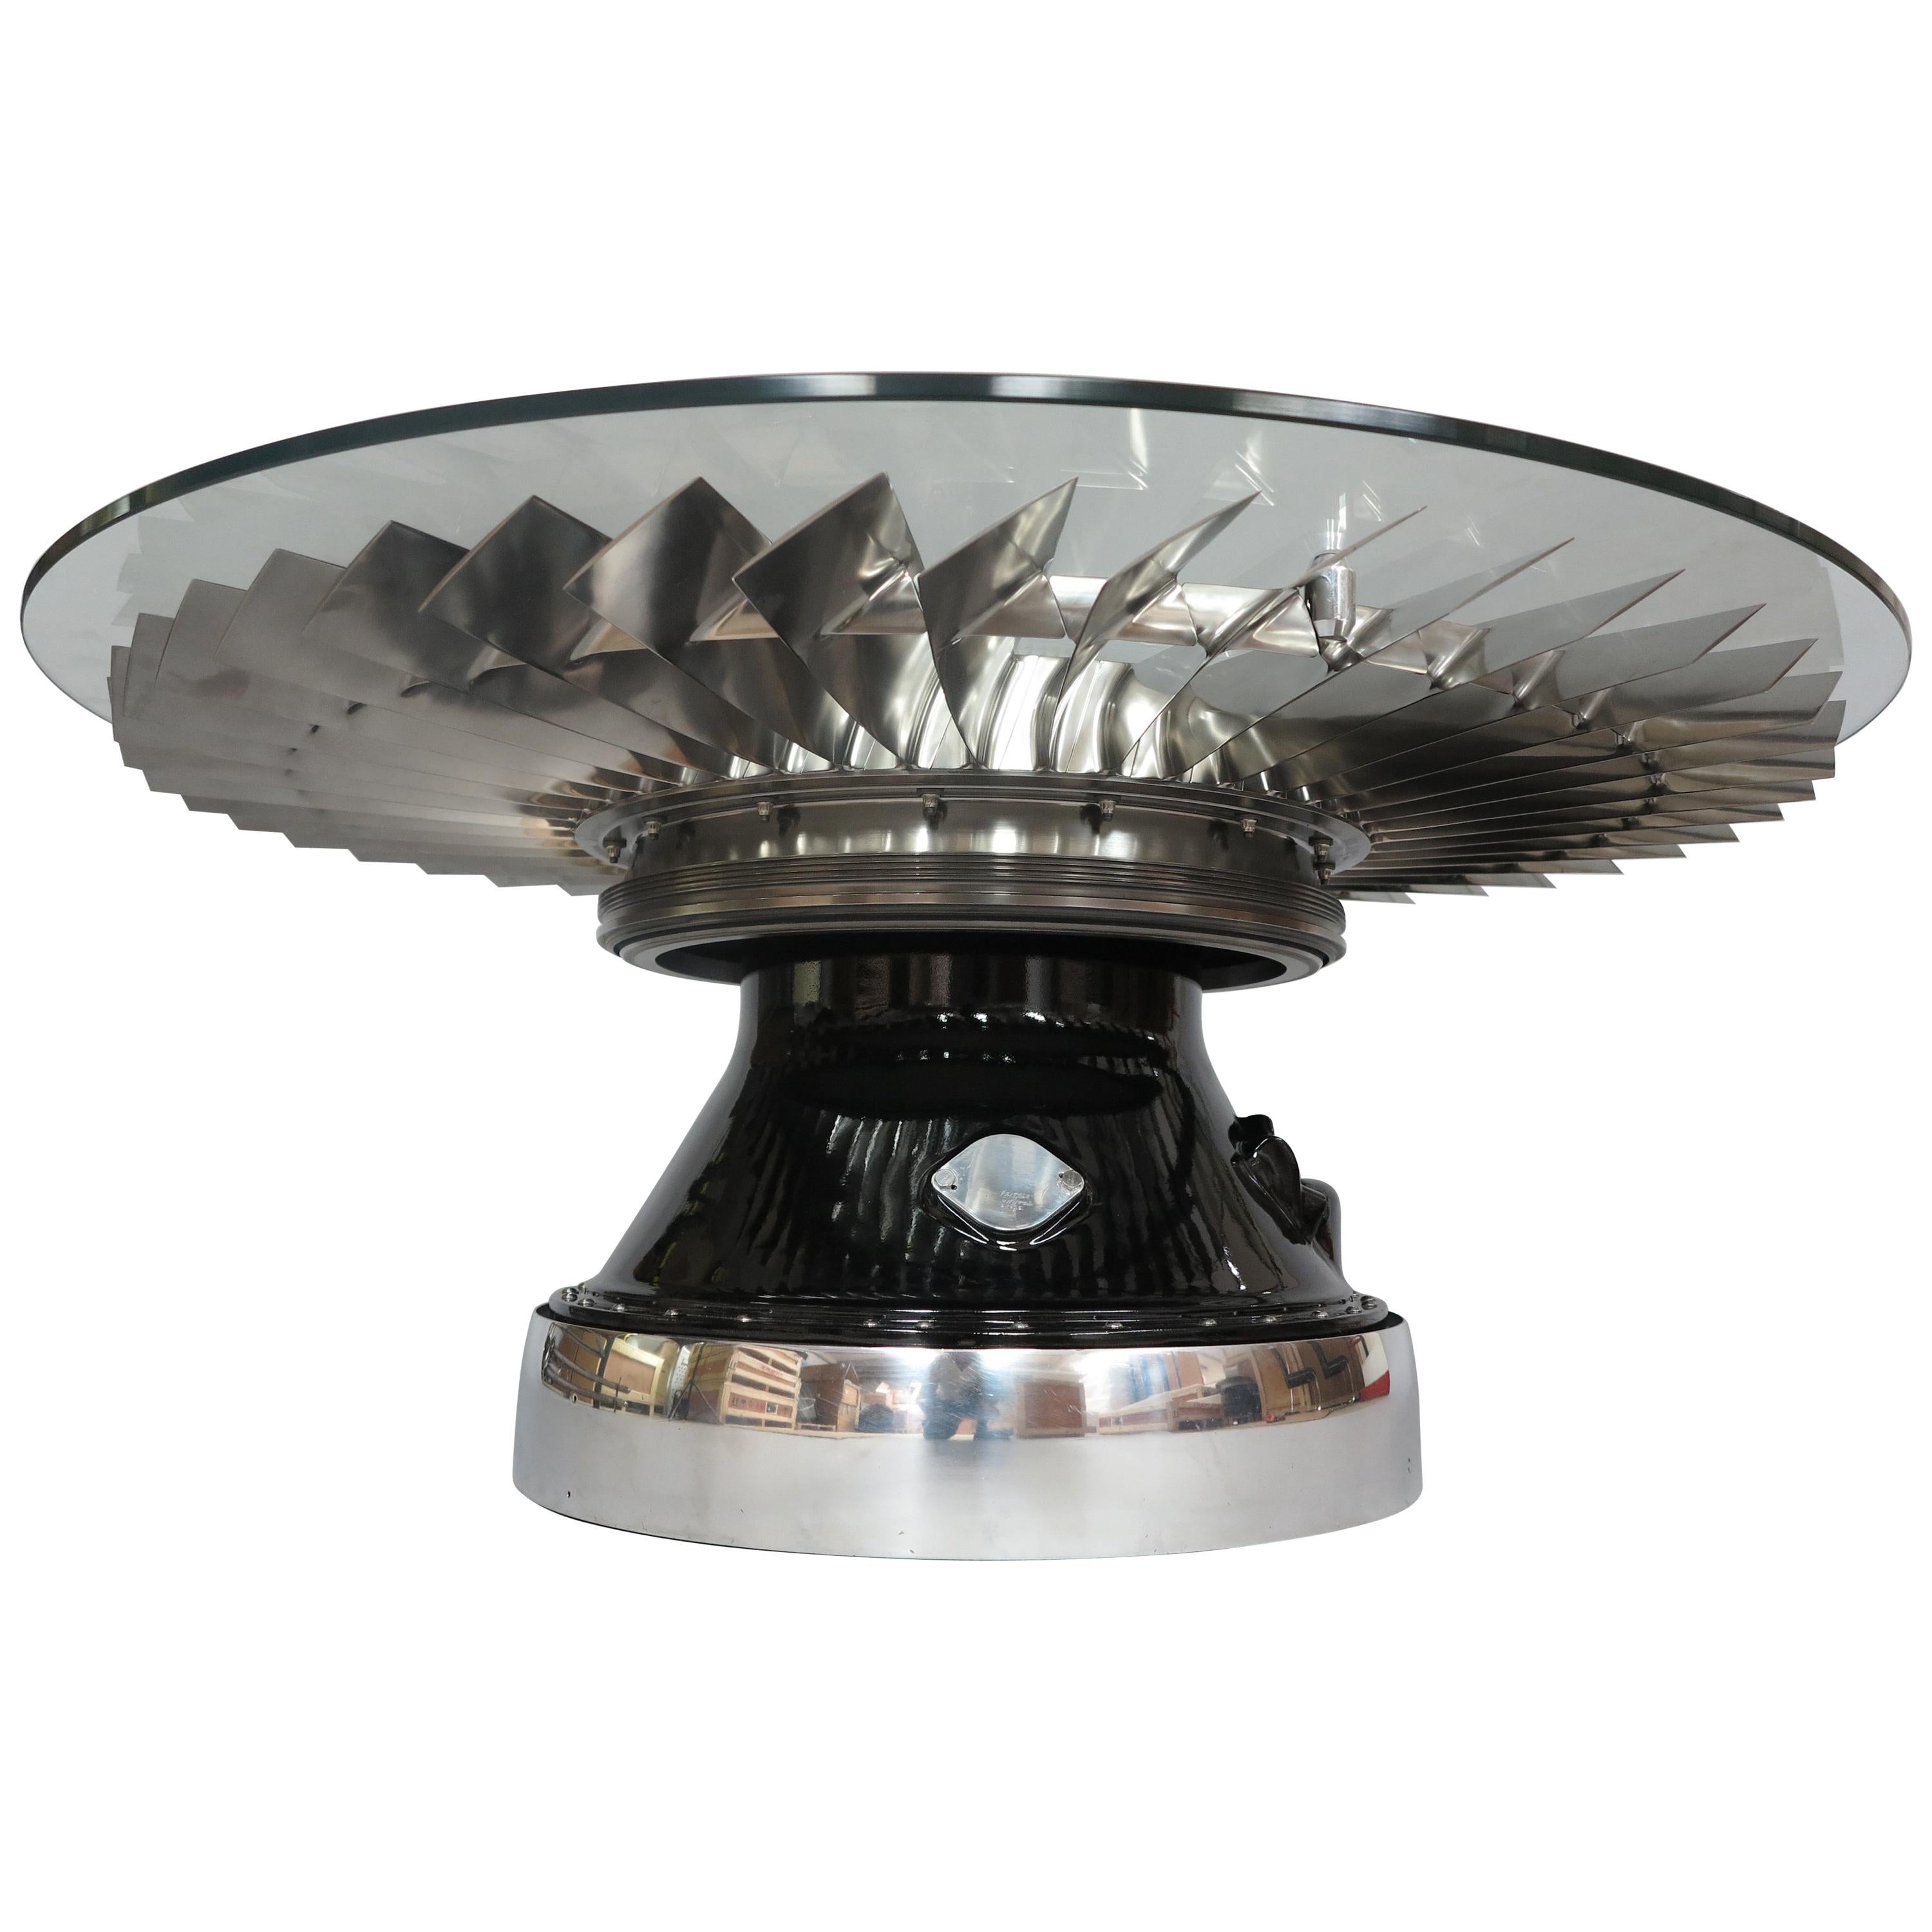 Spinning Jet Aircraft LP1 Fan Blade Coffee Table For Sale